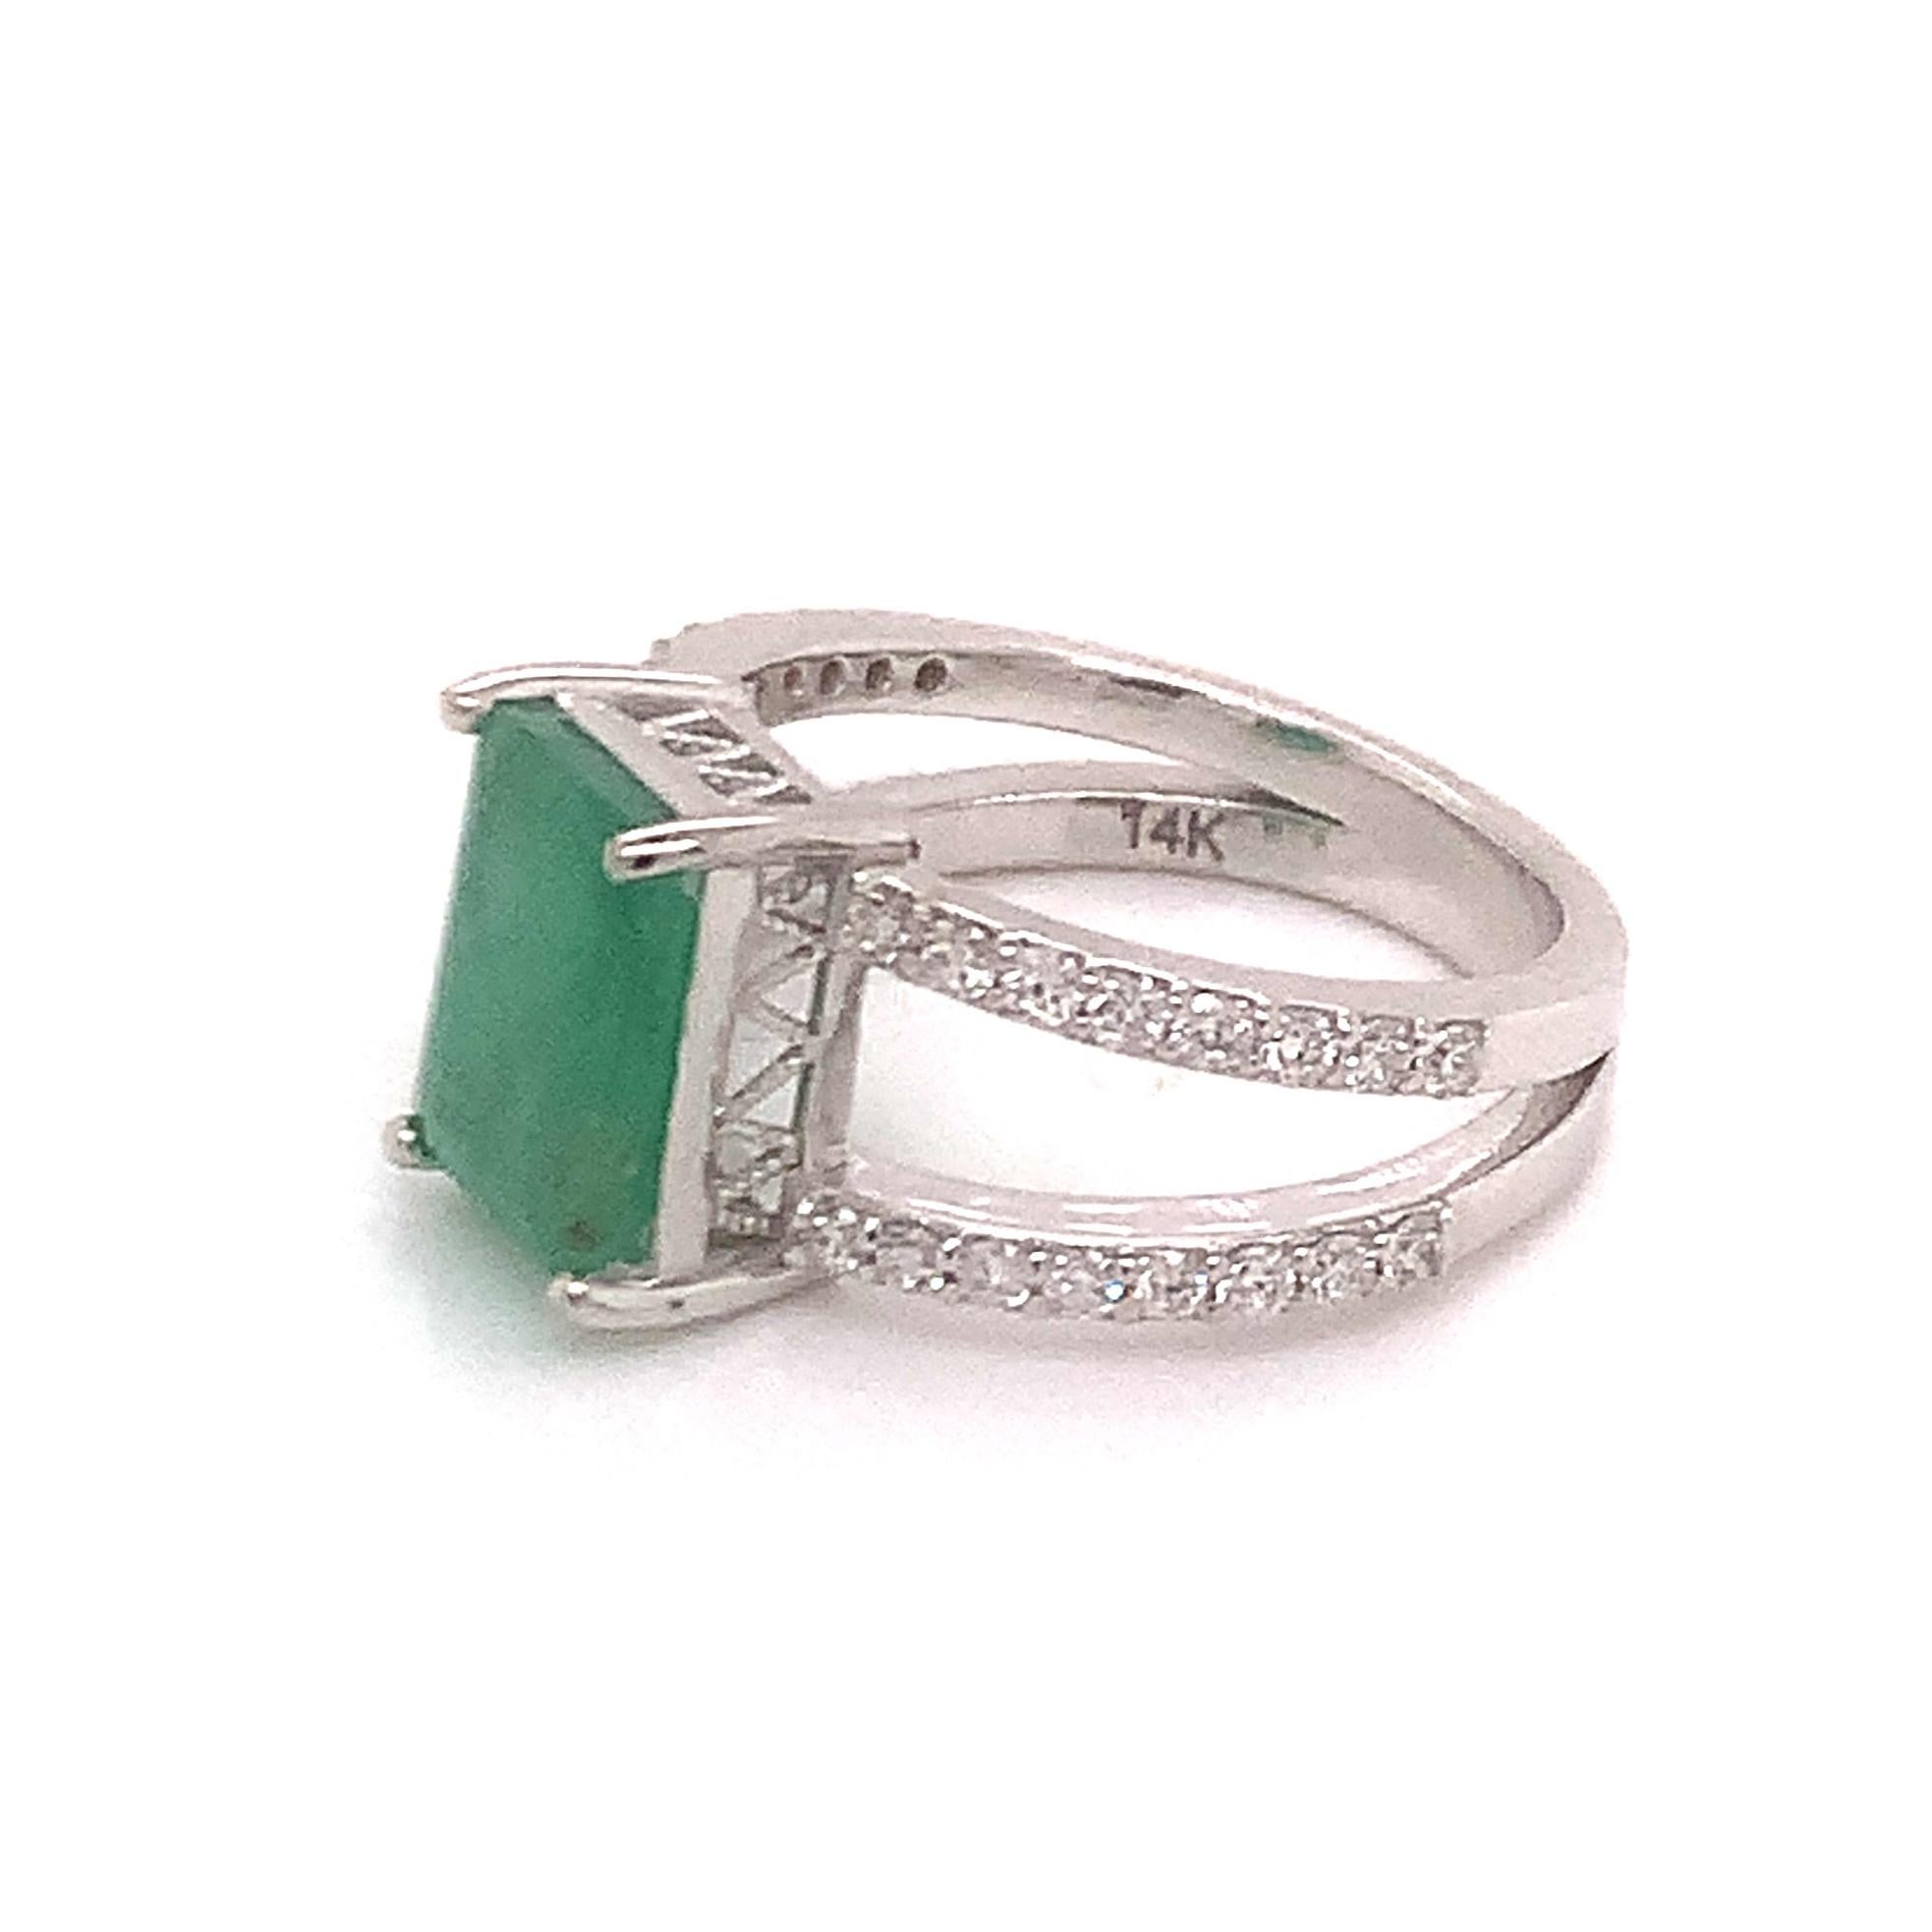 Natural Emerald Diamond Ring 14k Gold 2.85 TCW Certified For Sale 7